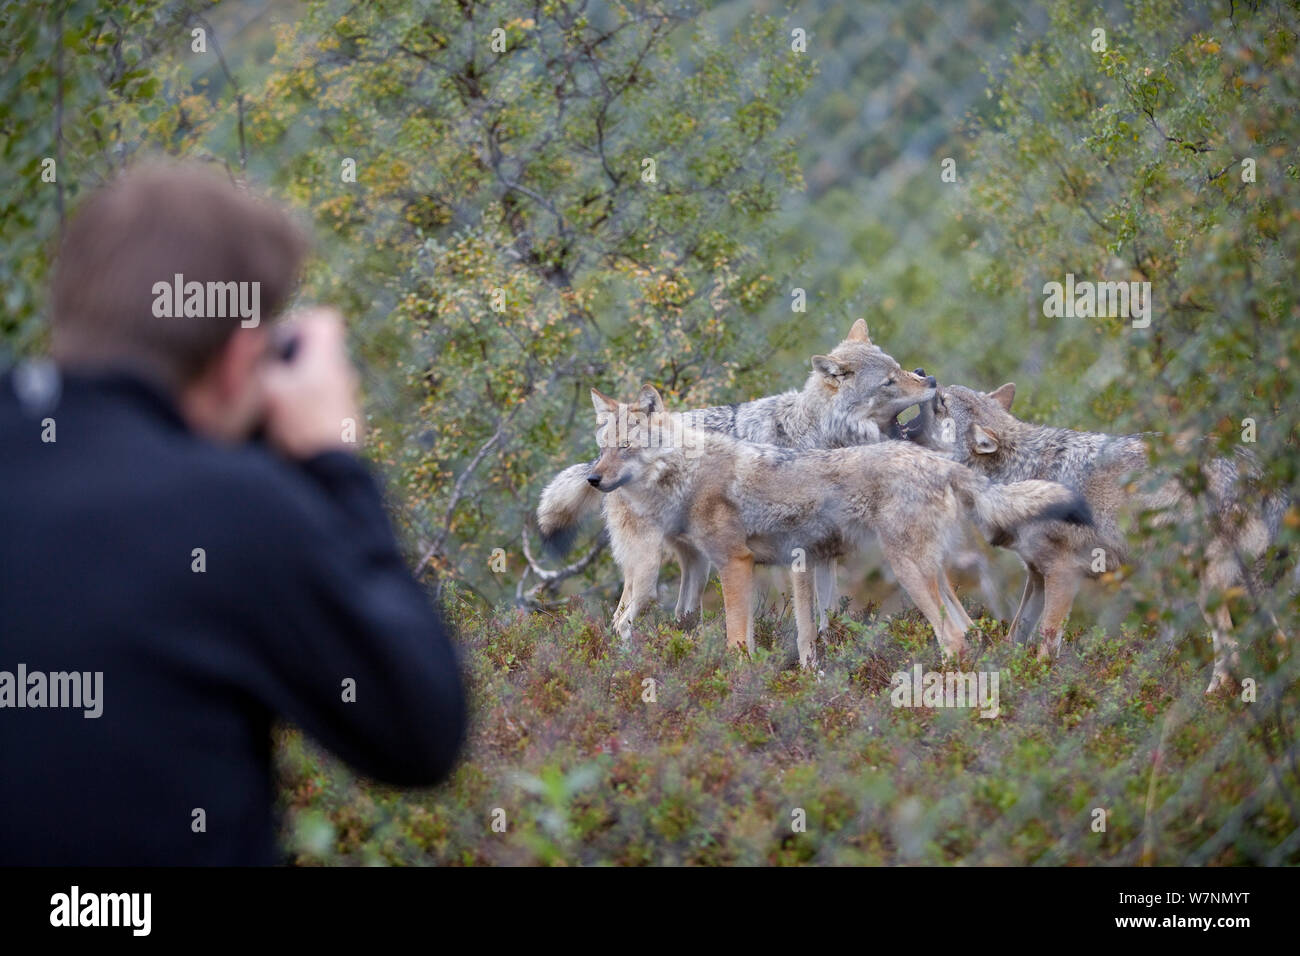 Eurasian wolves (Canis lupus lupus) being photographed in enclosure at education centre, Norway, captive Stock Photo